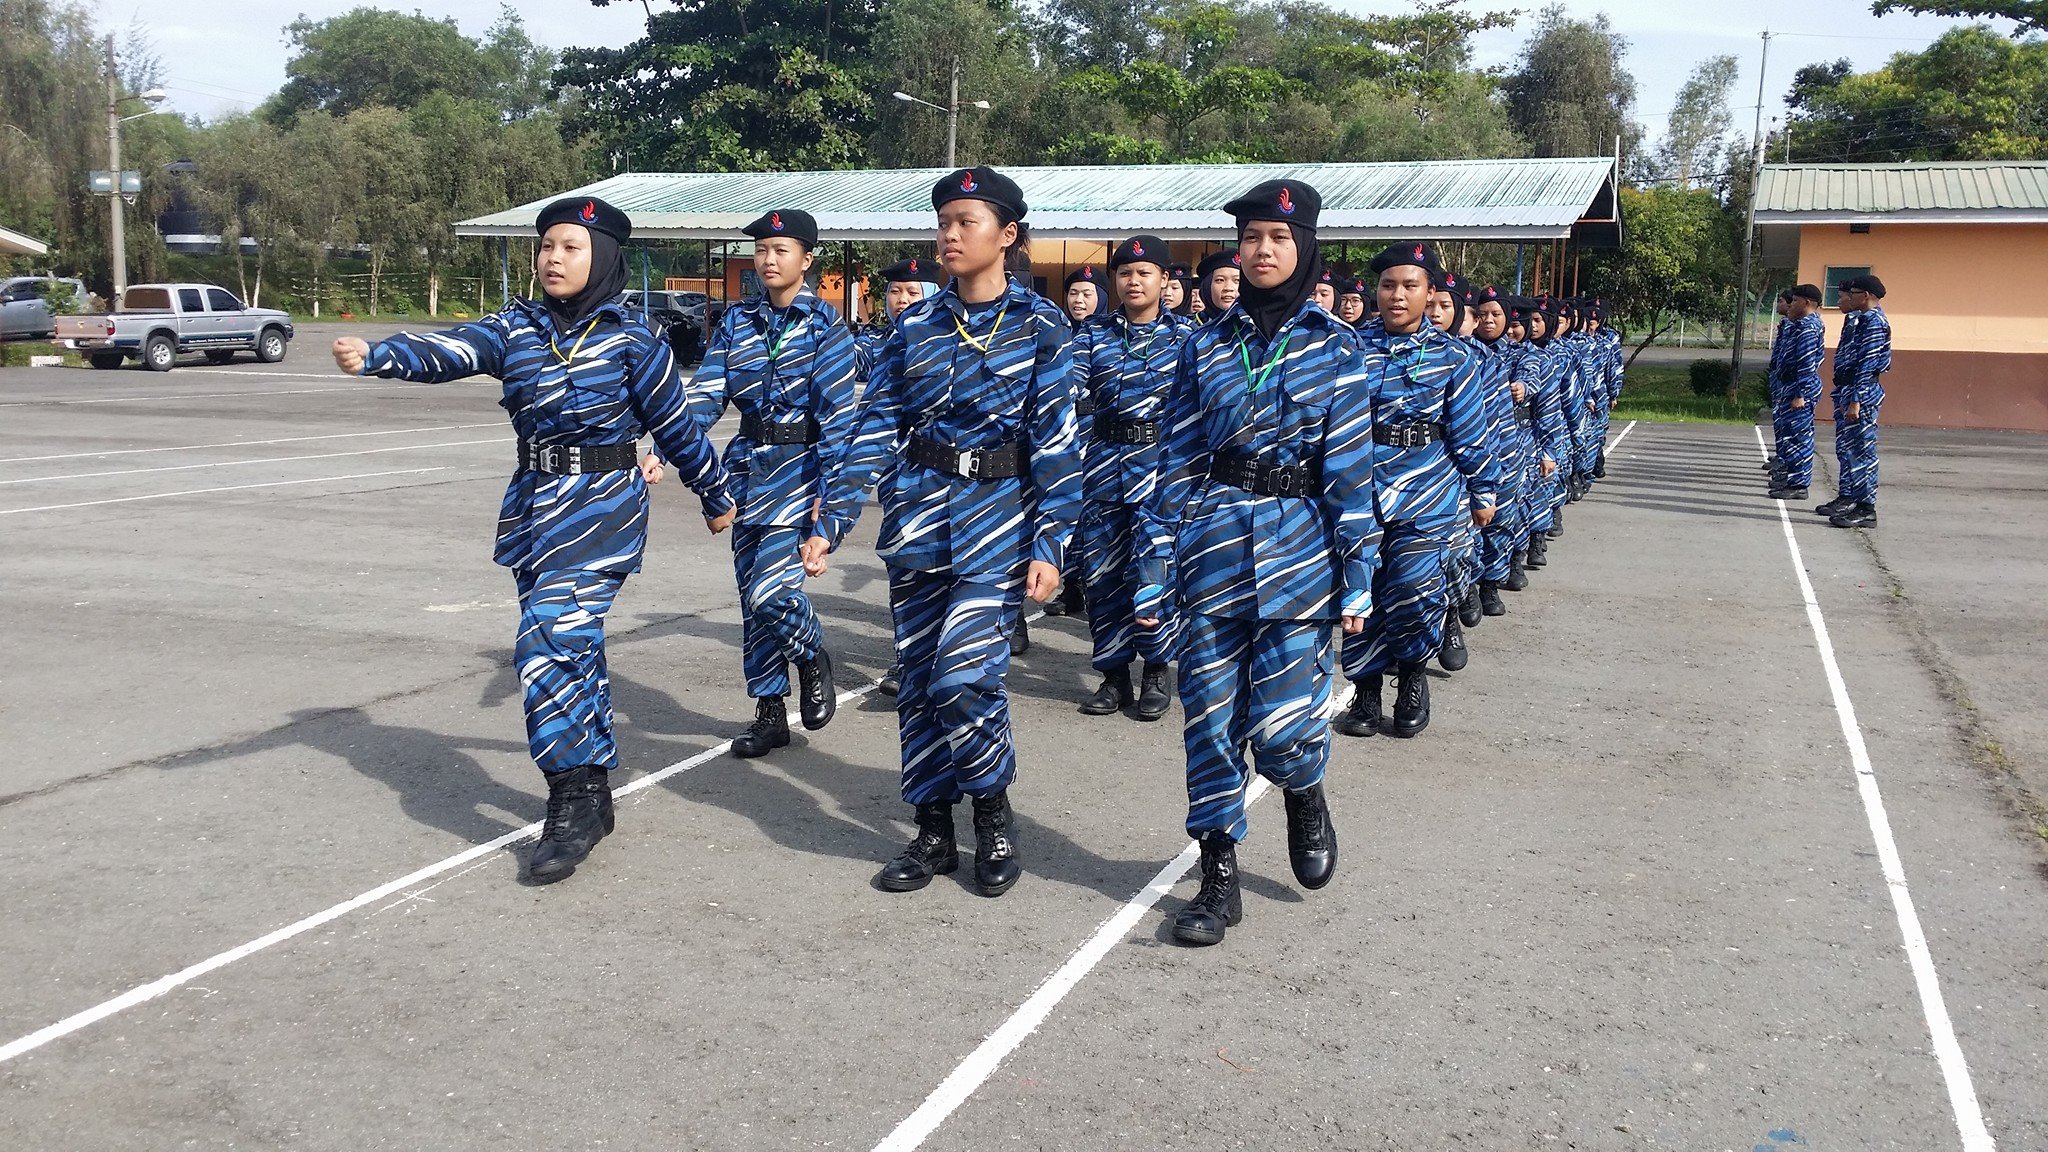 Plkn recruits marching